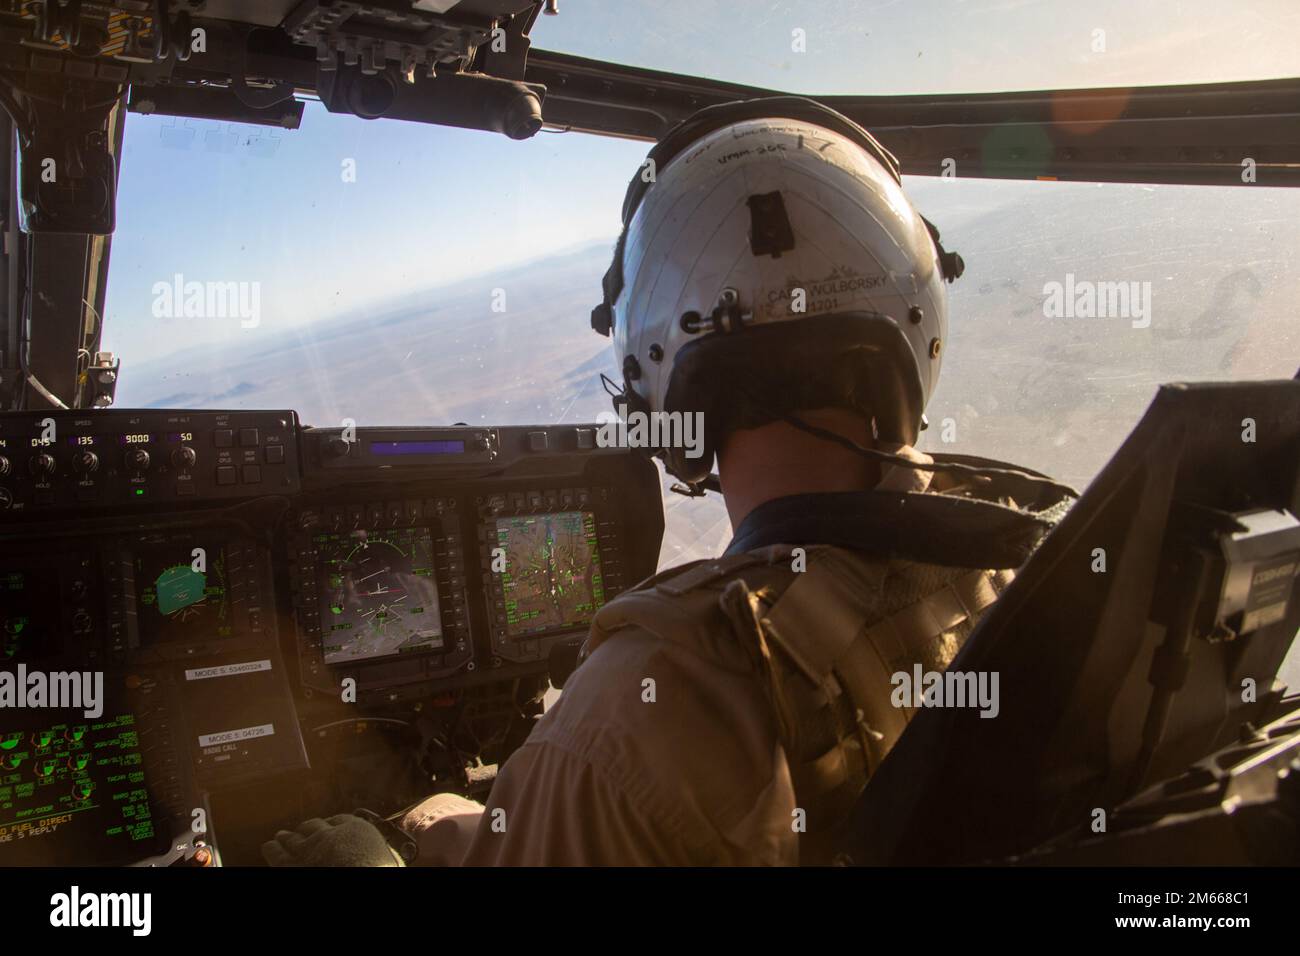 U.S. Marine Corps Capt. Samuel Wolborsky, an MV-22 pilot assigned to Marine Aviation Weapons and Tactics Squadron One (MAWTS-1), prepares for an air-to-air refuel during Weapons and Tactics Instructor (WTI) course 2-22, near Dugway, Utah, April 6, 2022. WTI is a seven-week training event hosted by MAWTS-1, providing standardized advanced tactical training and certification of unit instructor qualifications to support Marine aviation training and readiness, and assists in developing and employing aviation weapons and tactics. Stock Photo